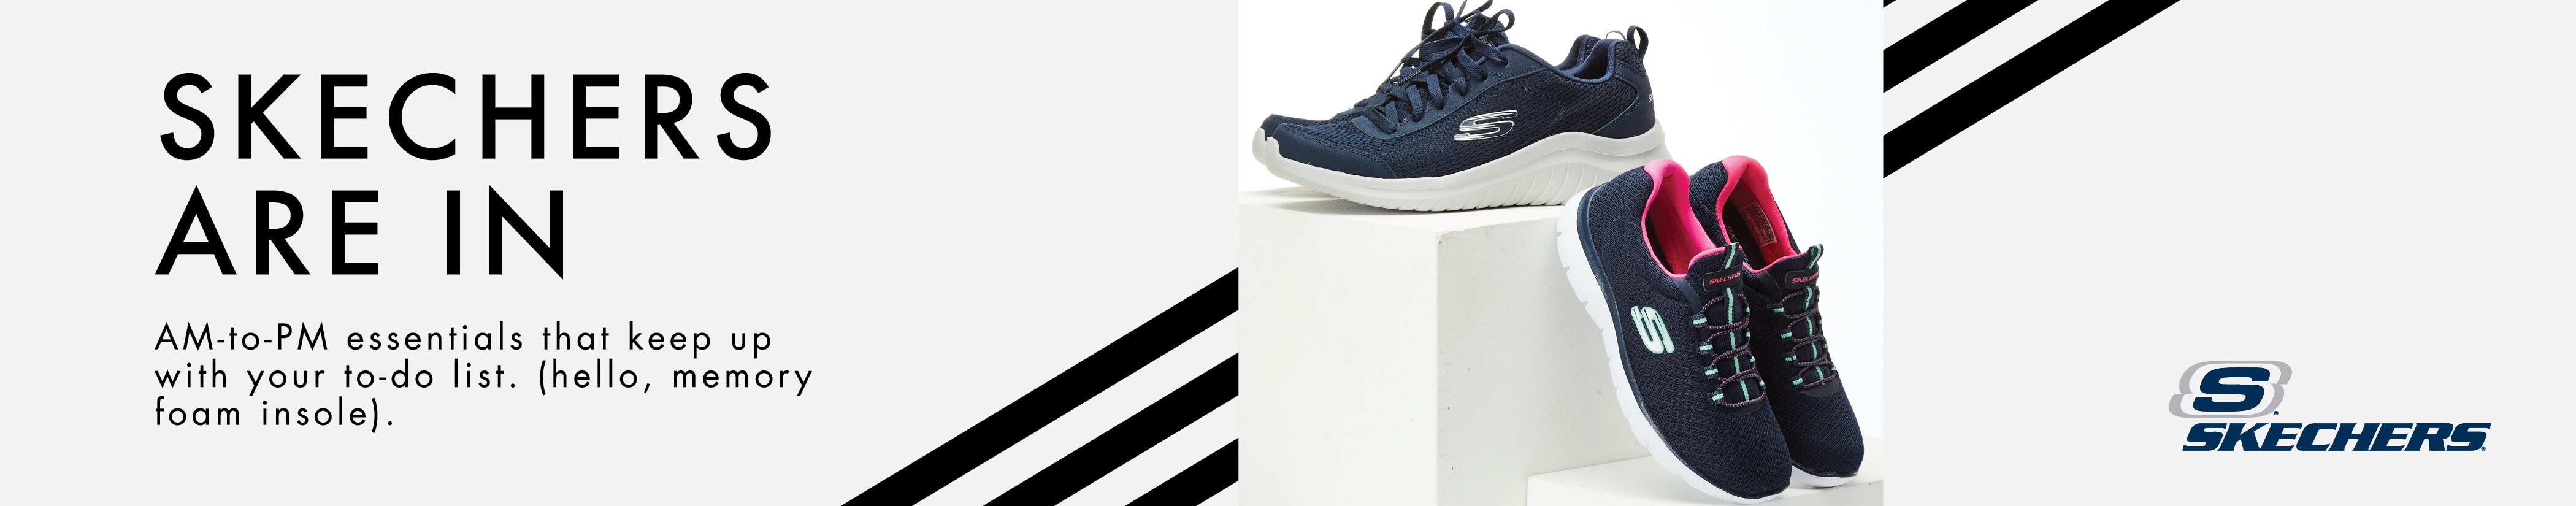 where to buy skechers online in canada